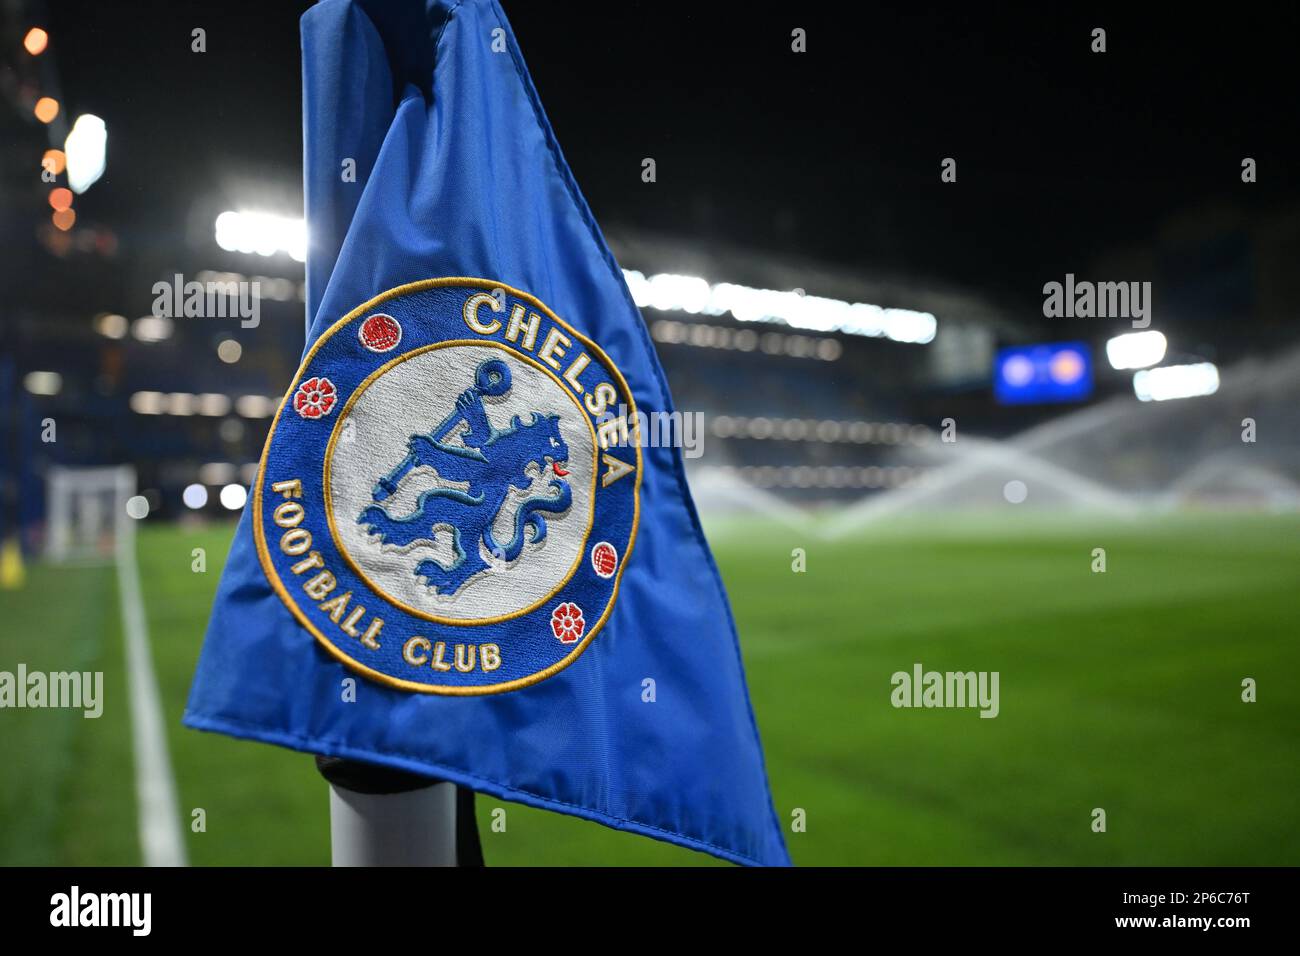 Chelsea FC on X: Back at Stamford Bridge, the ☀️ is shining and